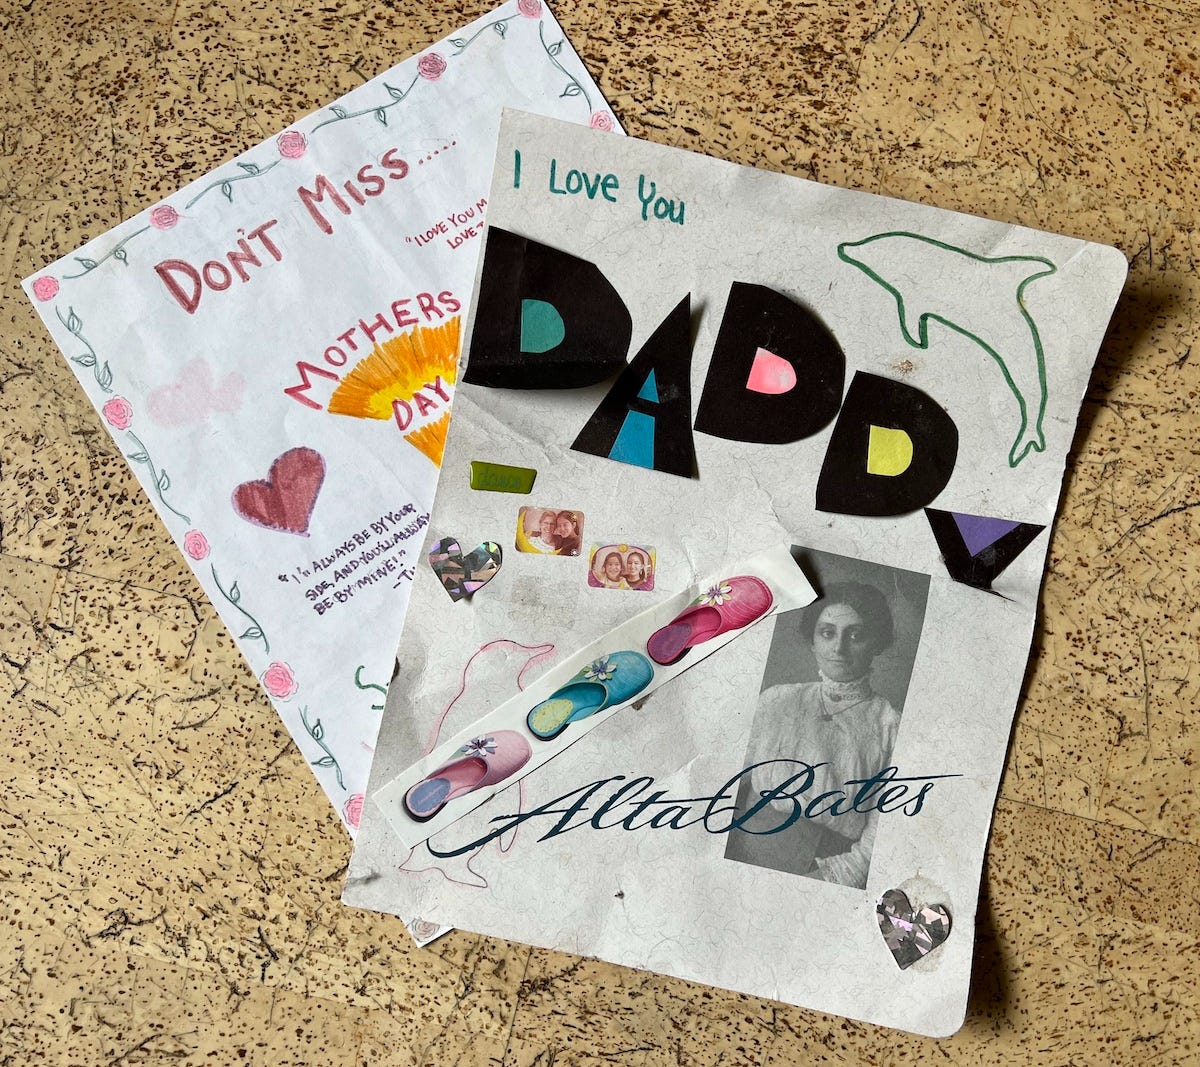 Homemade cards for Mother's and Father's days from the author's own collection.